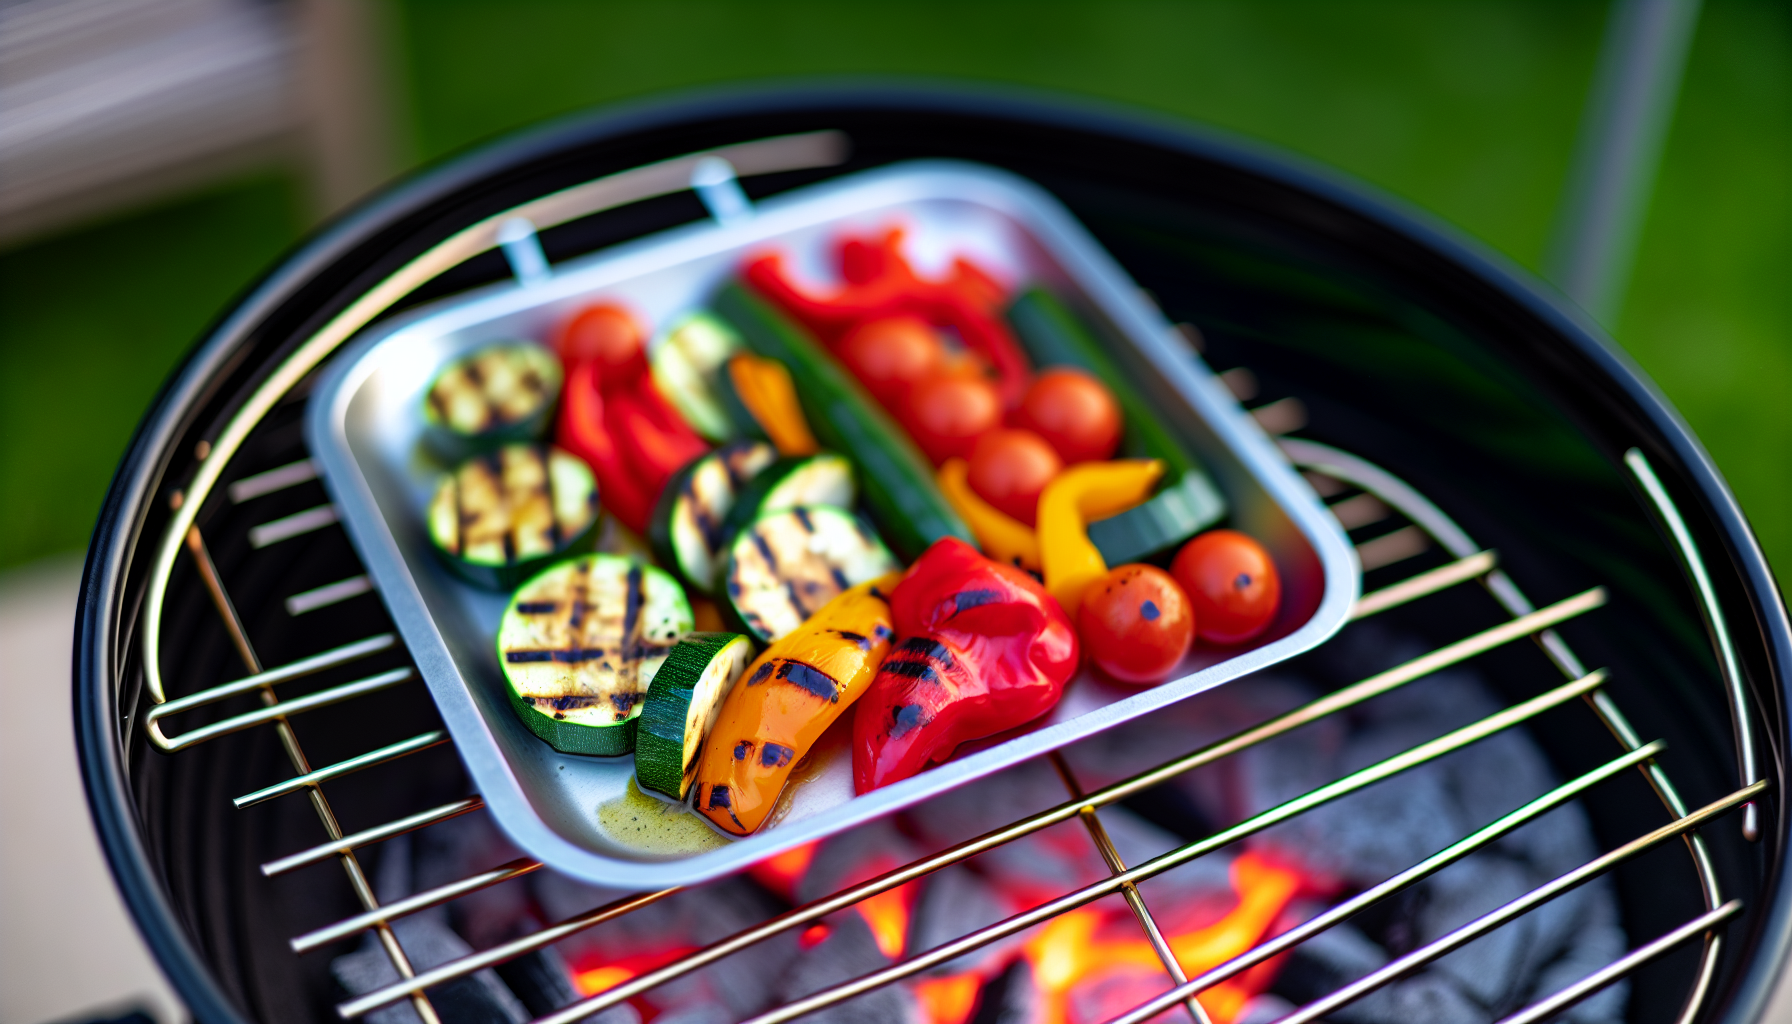 Vegetable grill tray on a barbecue grill